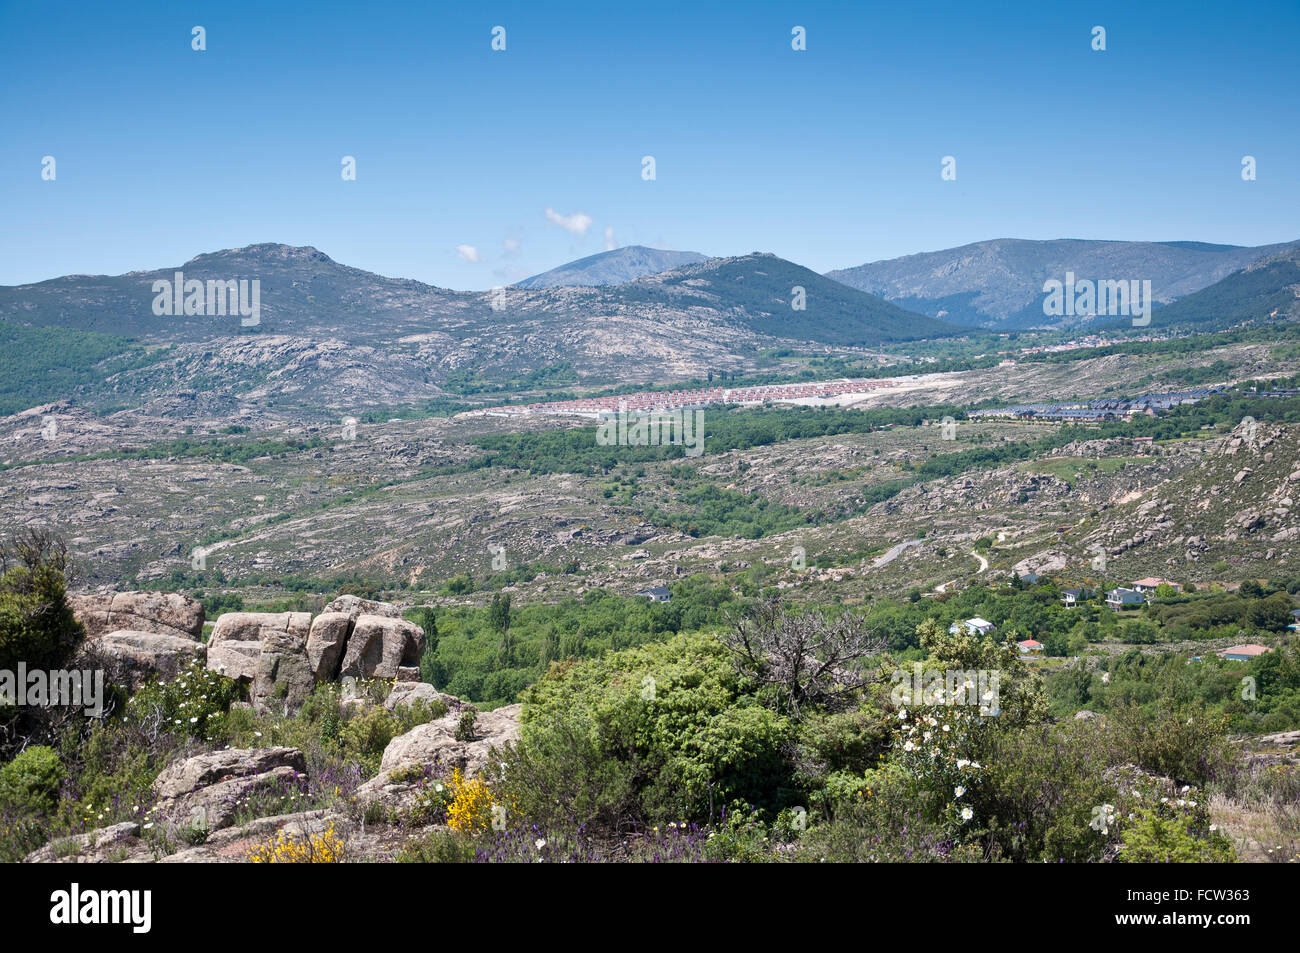 Urbanization at foot of the mountain in Guadarrama Mountains, Madrid, Spain Stock Photo